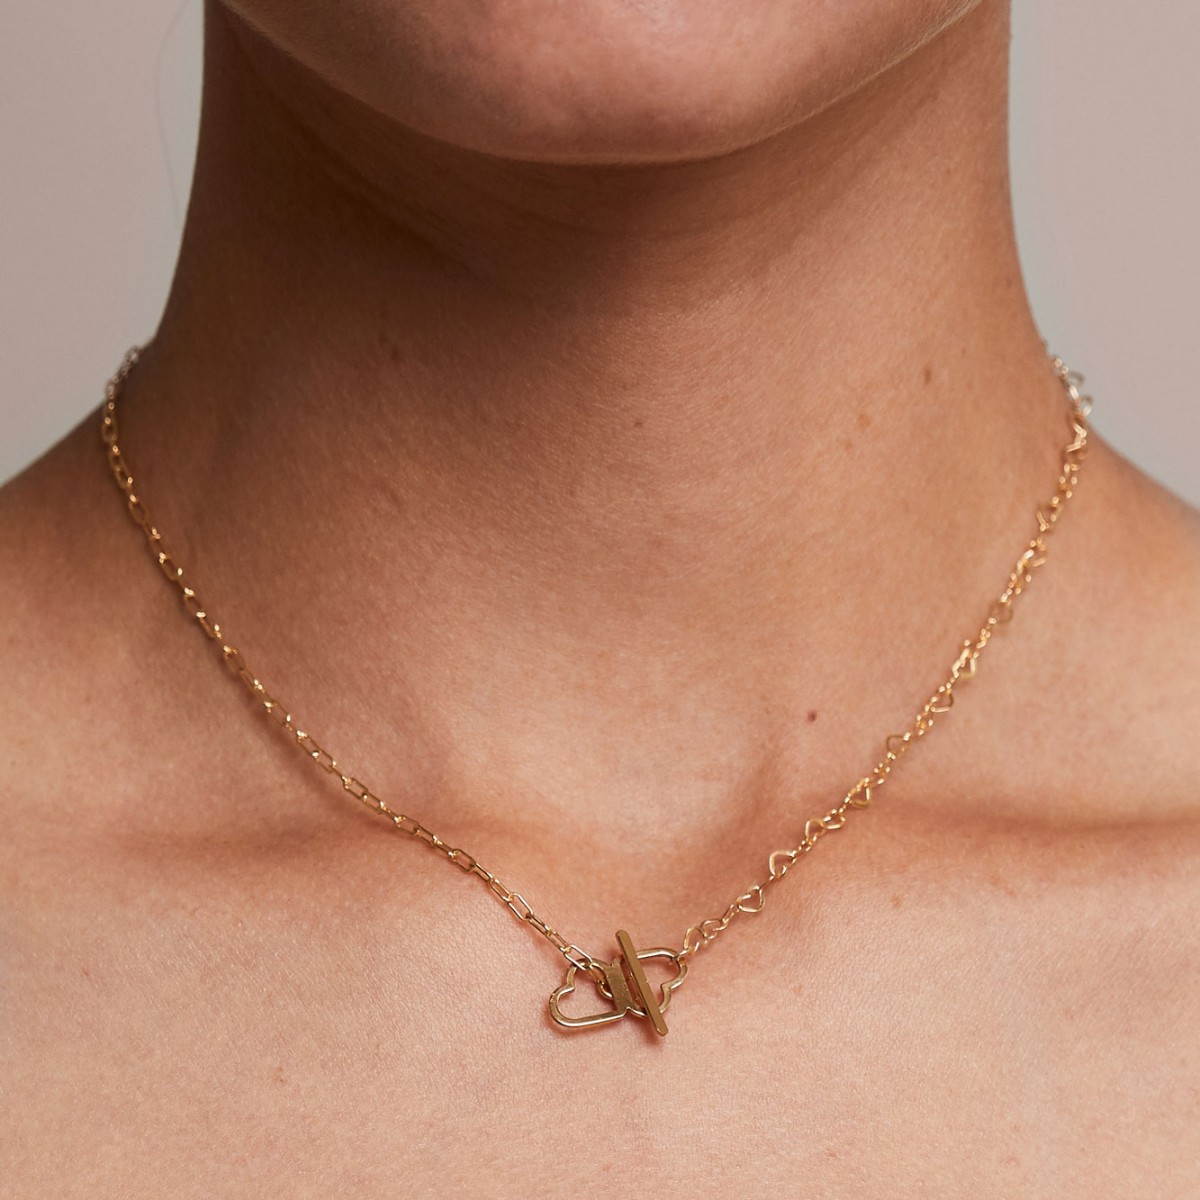 related by objects - just hearts extended necklace - 925 Sterlingsilber 18k goldplattiert